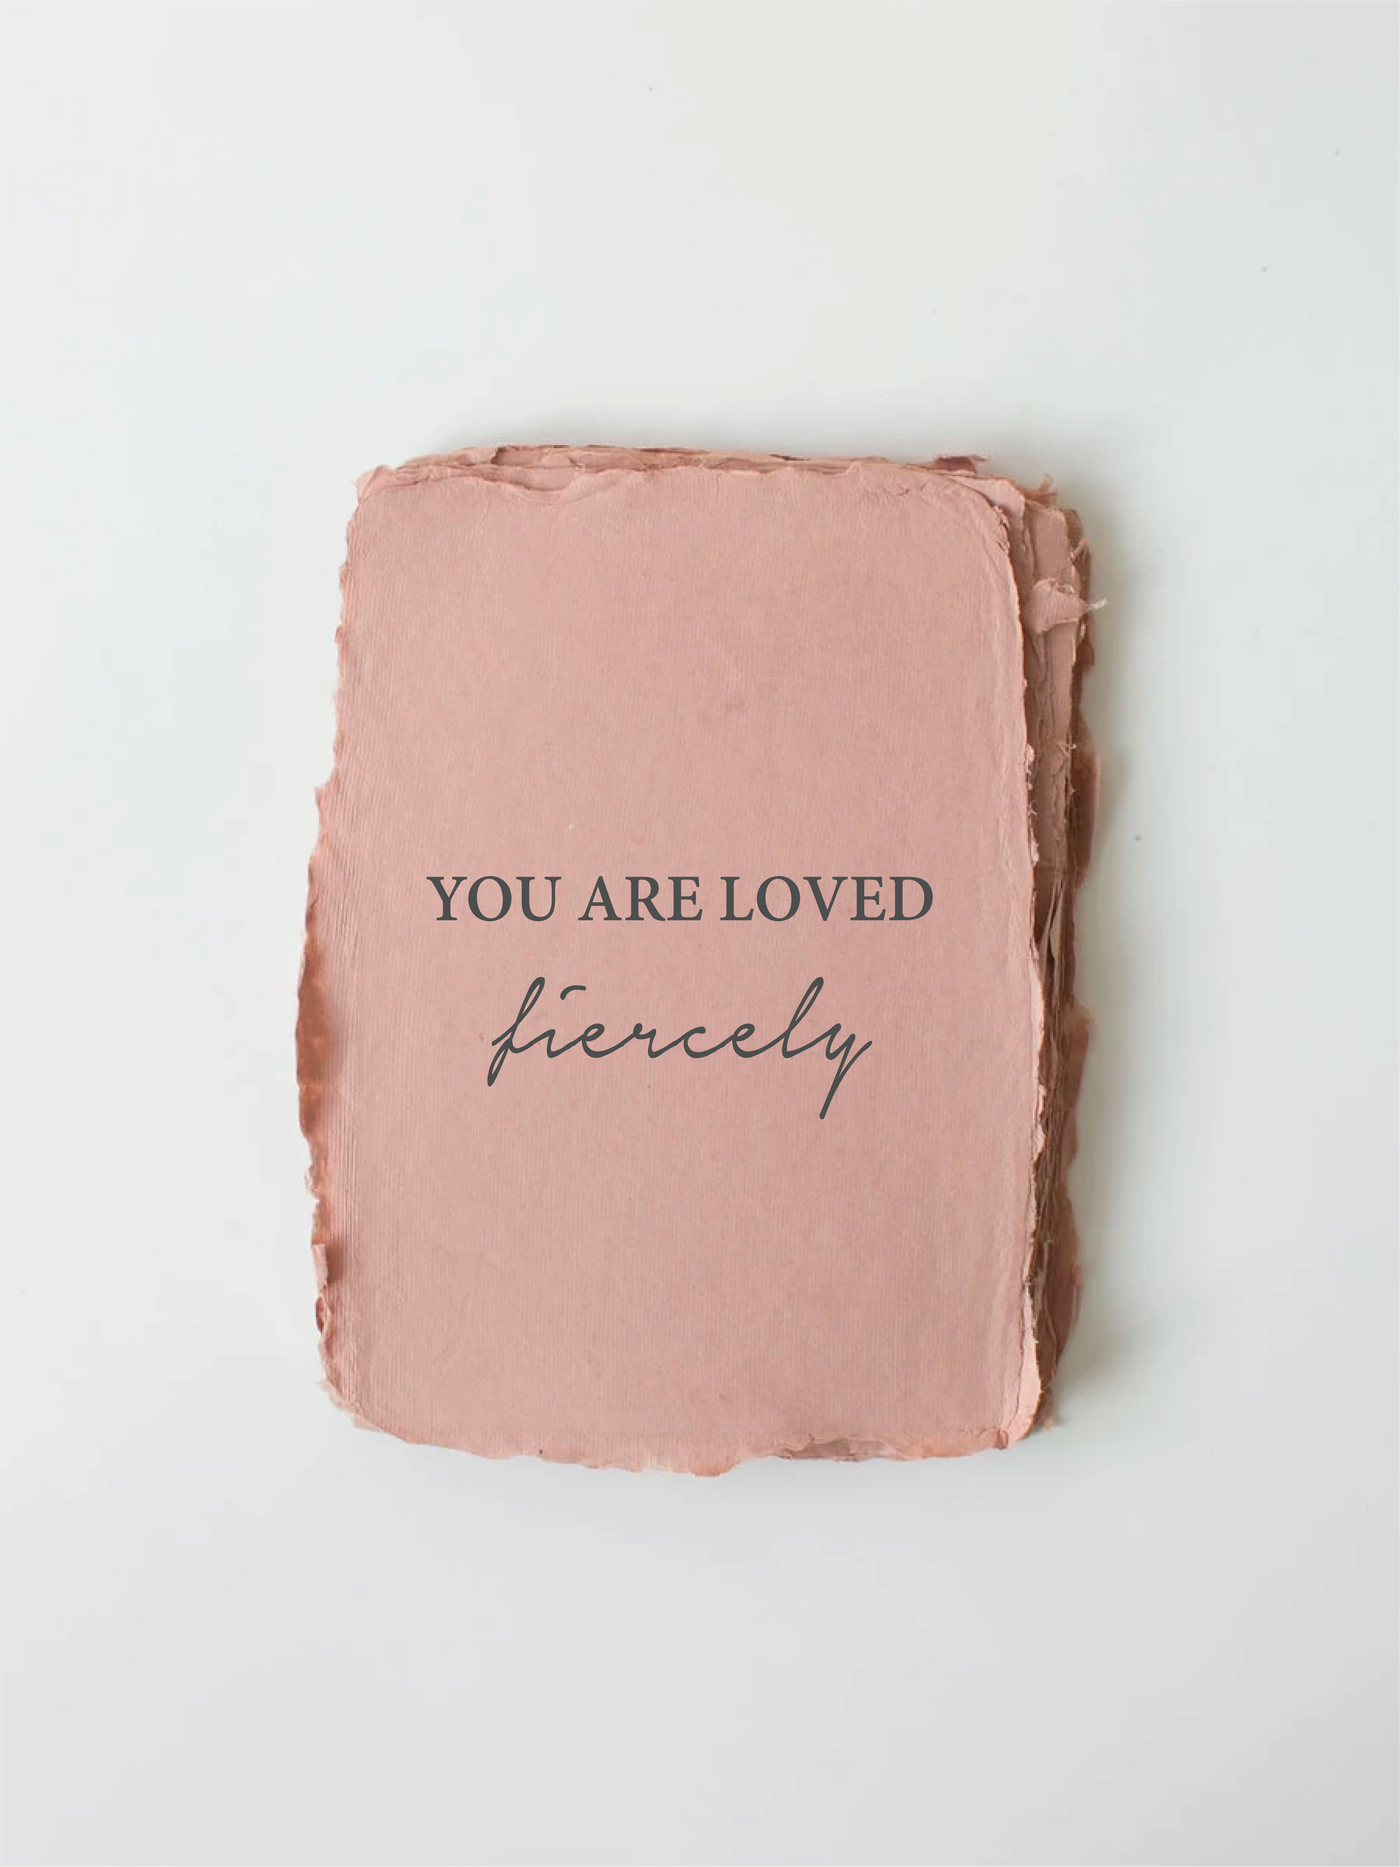 "You Are Loved, Fiercely." Love/Friendship Card